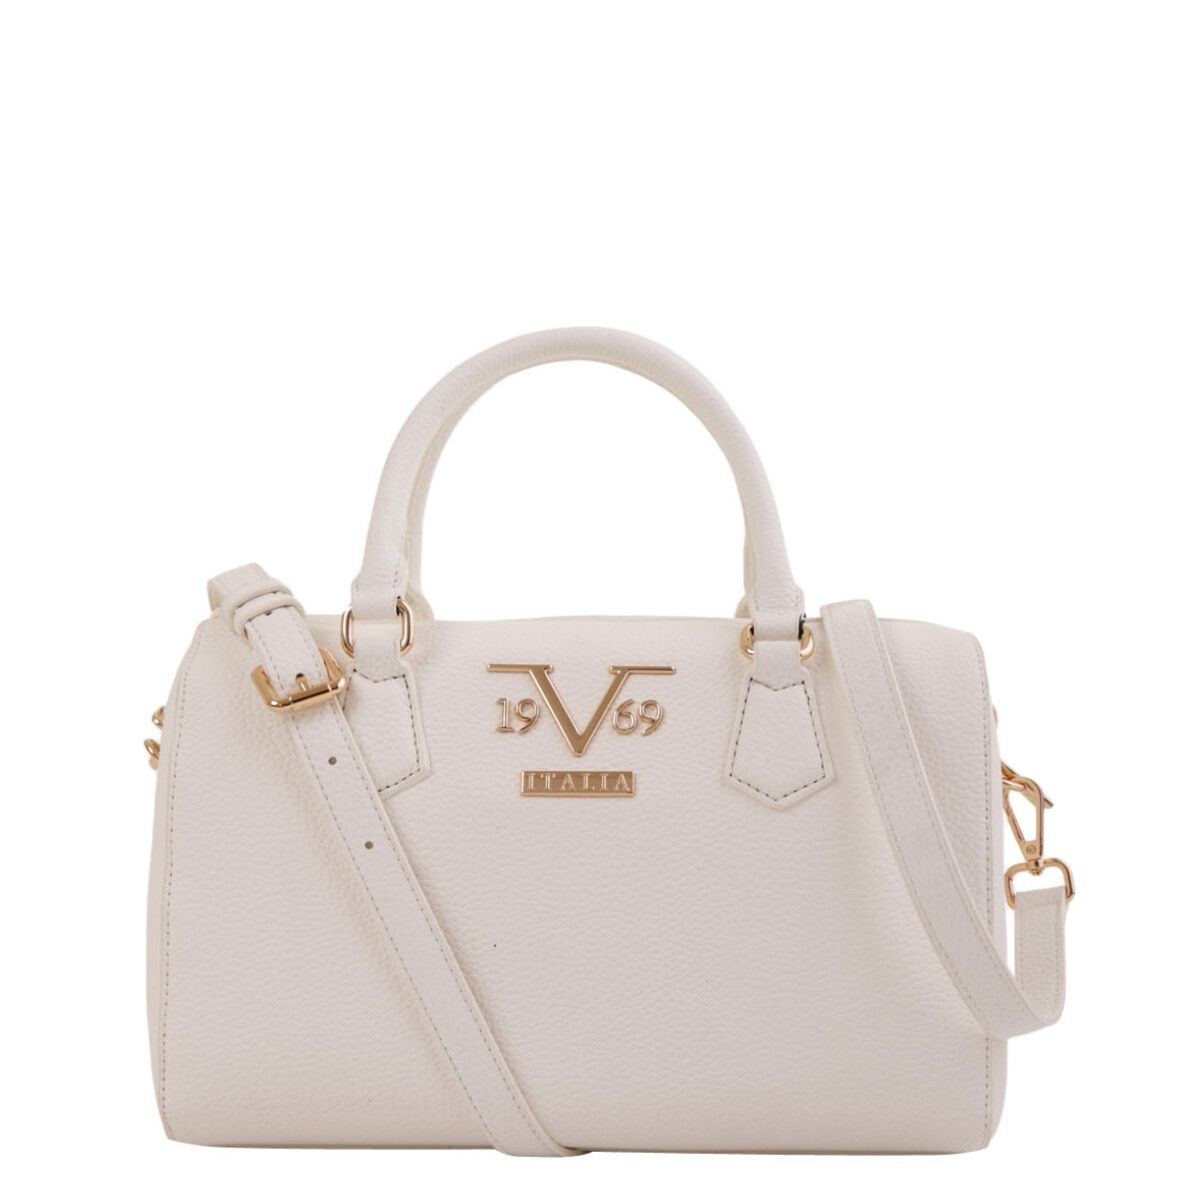 Brand: 19v69 Italia Gender: Women Type: Bags Season: Fall/Winter PRODUCT DETAIL • Color: white • Fastening: with zip • Pockets: inside pockets • Size (cm): 17x28x16 • Details: -handbag -with shoulder strap • Article code: VI20AI0024 COMPOSITION AND MATERIAL • Composition: -100% leather